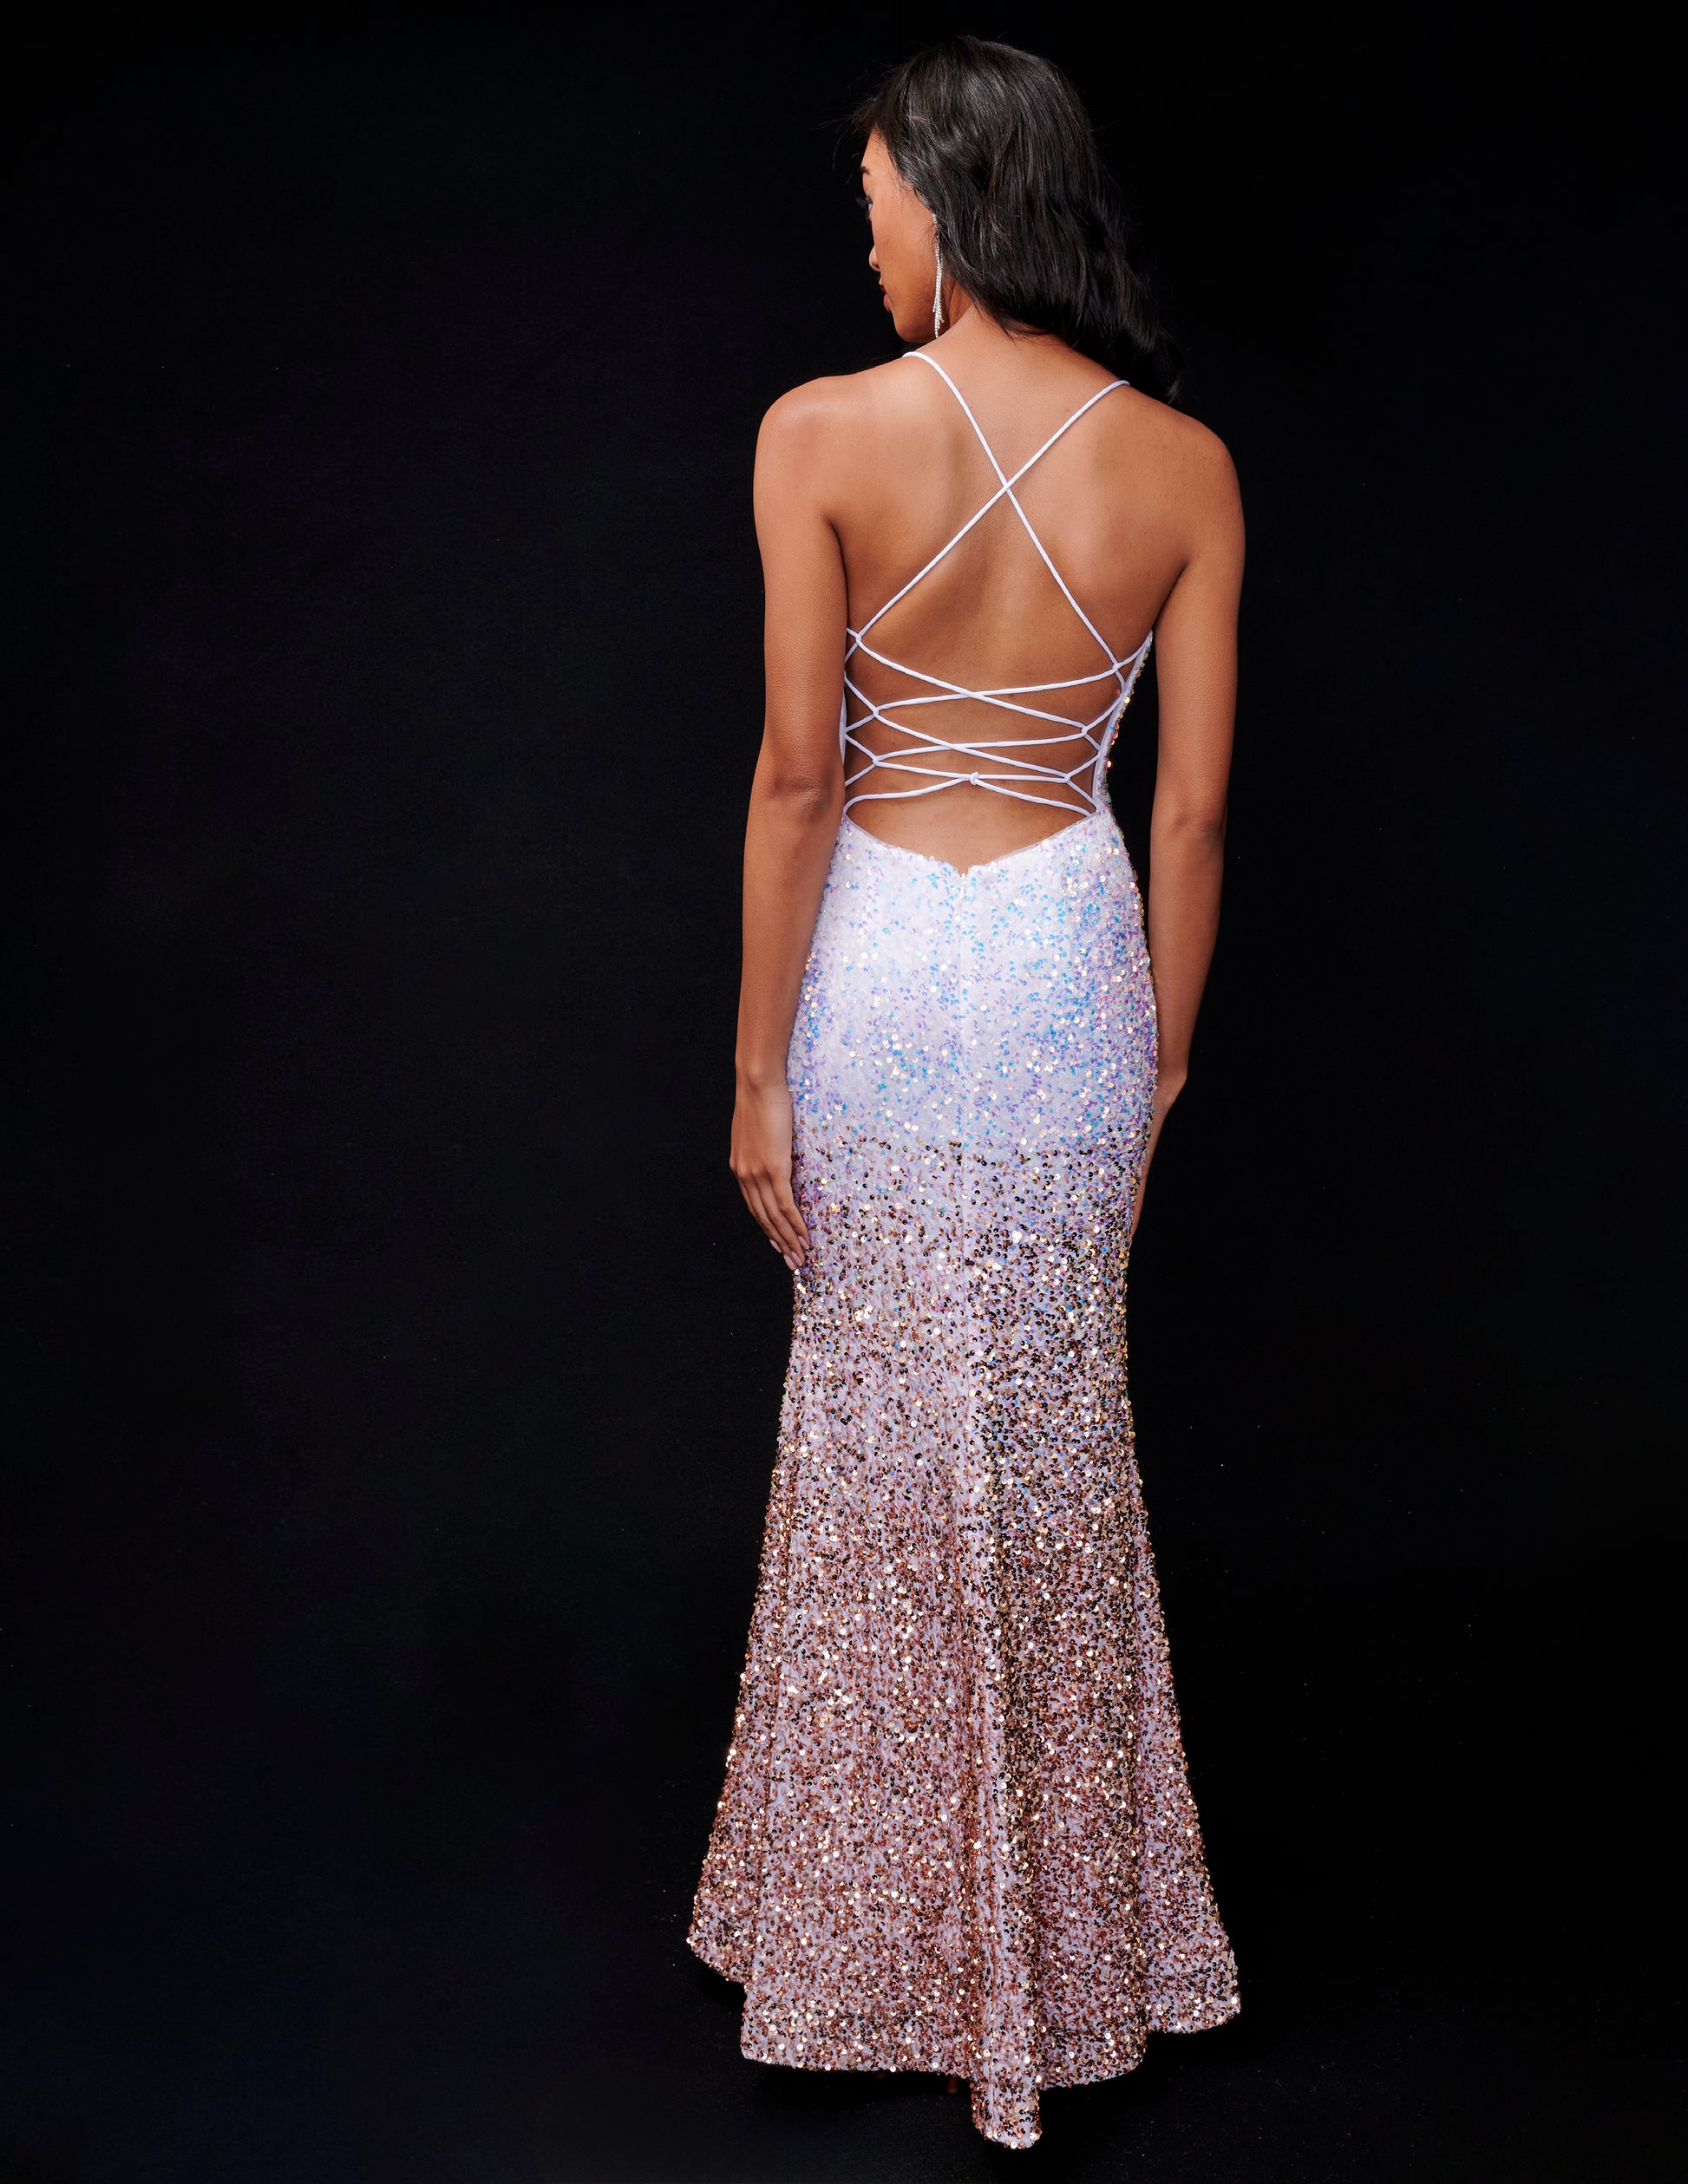 Get ready to shine in the stunning Nina Canacci 1554 Prom Dress! The velvet sequin ombre design adds a touch of glamour, while the fitted silhouette and slit backless corset accentuate your curves. Perfect for any formal occasion, this gown will make you stand out with its elegant and stylish look.